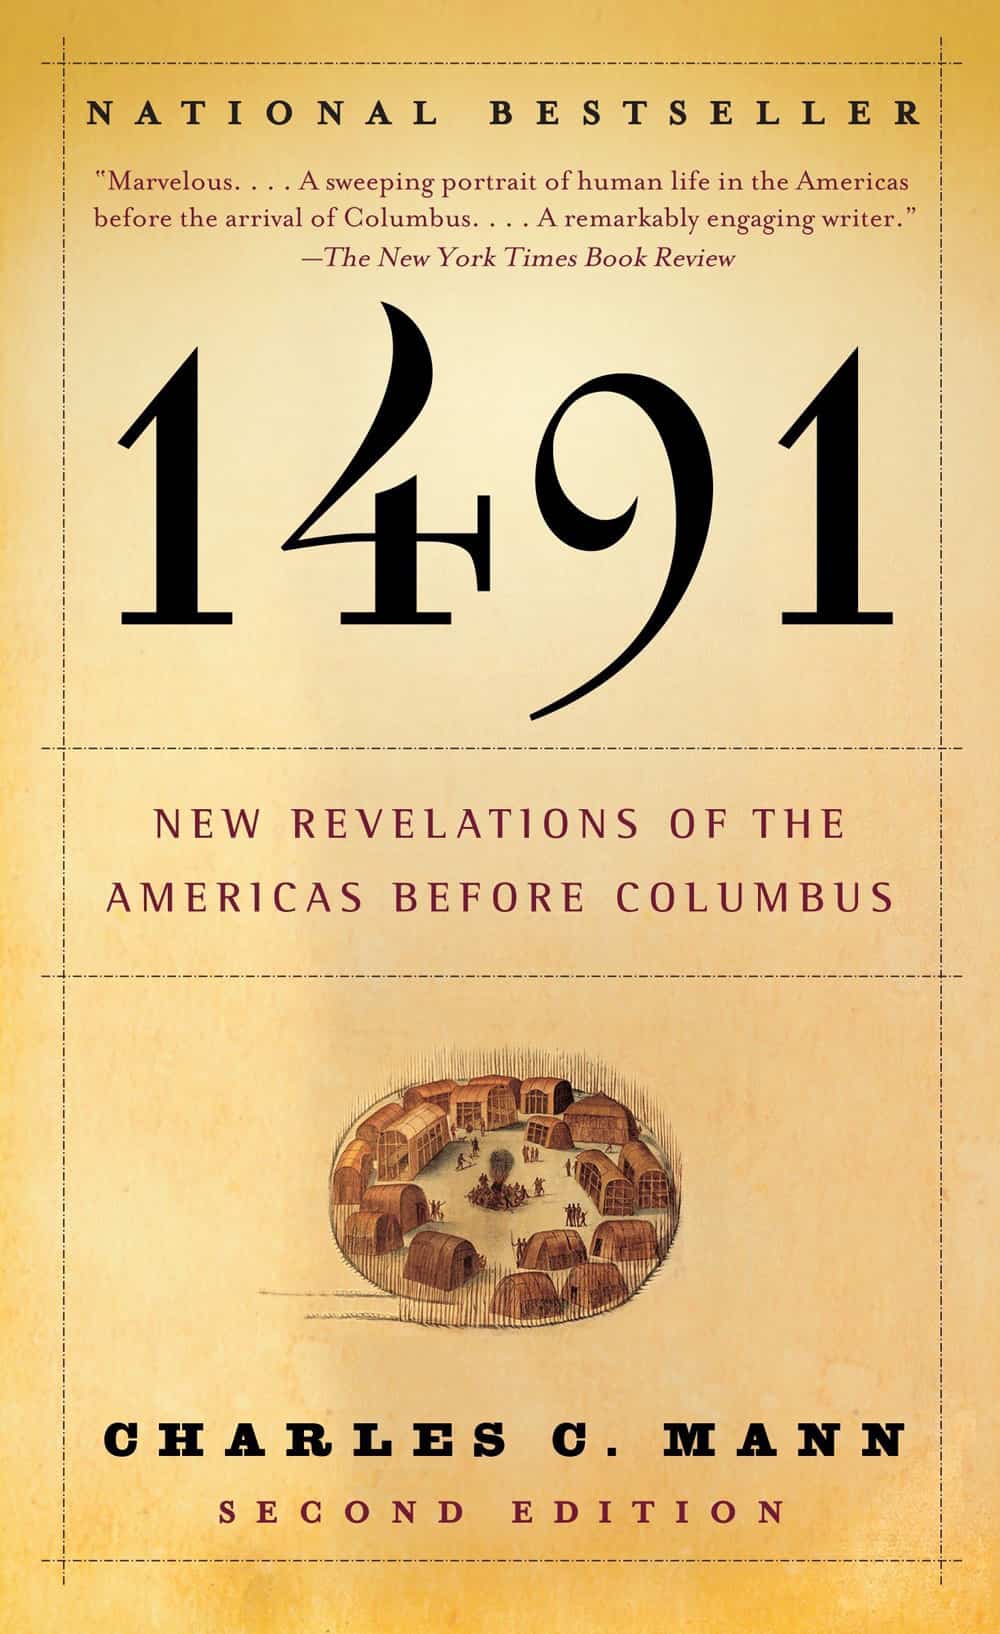 The cover of 1491